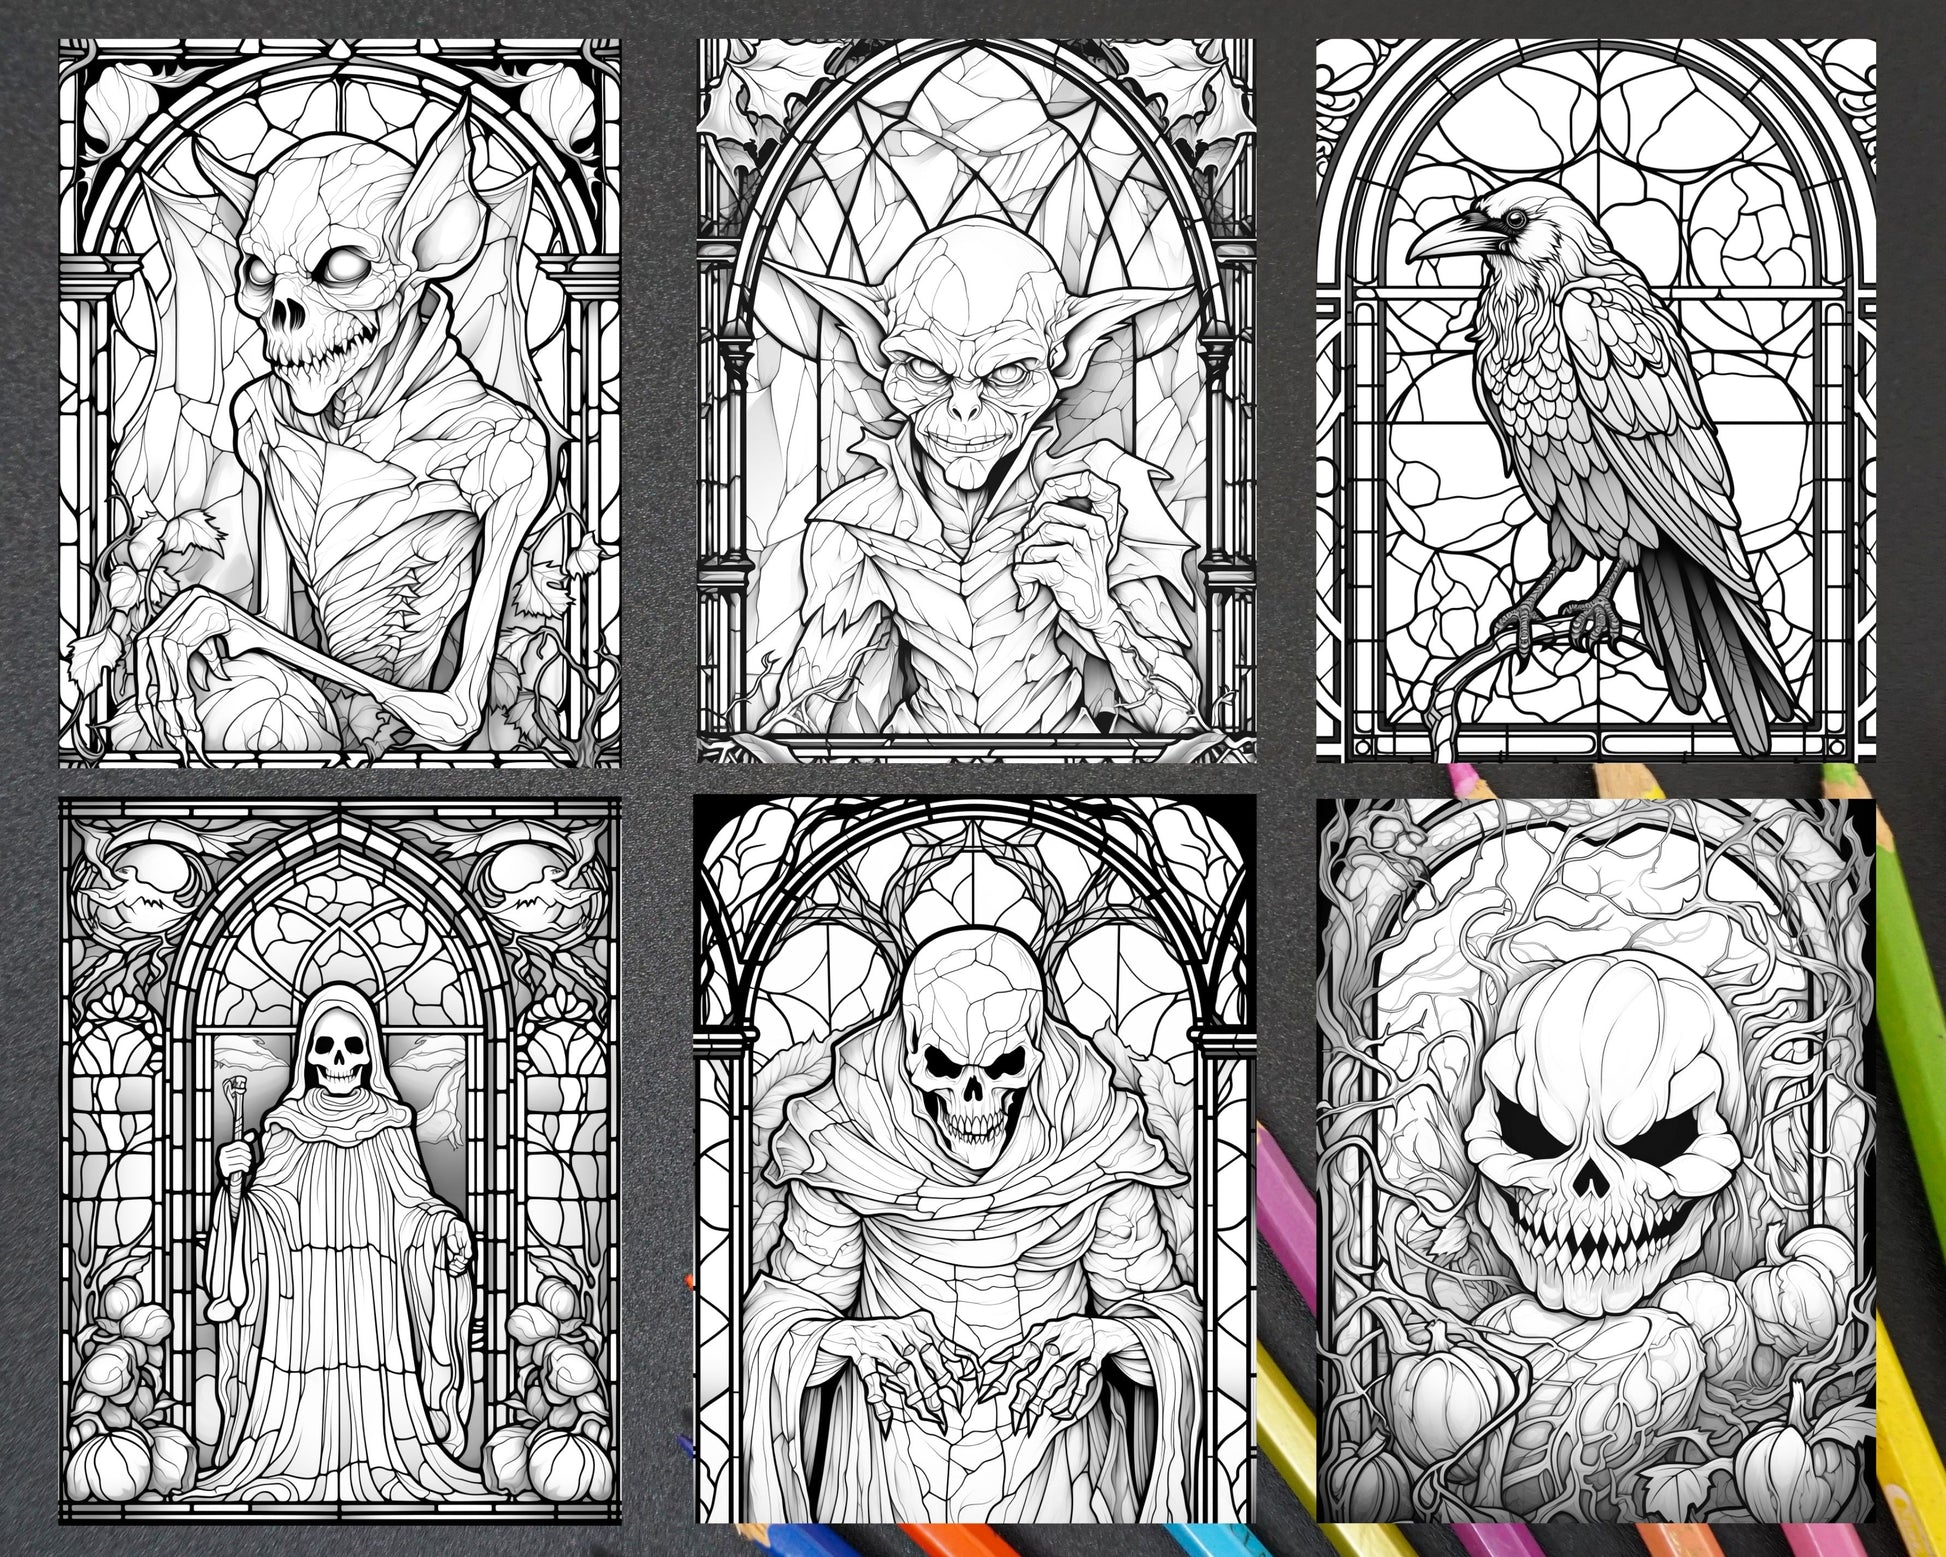 Halloween Stained Glass Coloring Pages, Grayscale Coloring Sheets for Adults, Printable Halloween Art, Adult Coloring Book Pages, Halloween DIY Decor, Witch and Pumpkin Coloring Pages, Ghost and Bat Coloring, October Coloring Pages, Halloween Coloring Pages for Adults, Halloween Grayscale Coloring, Spooky Coloring Pages